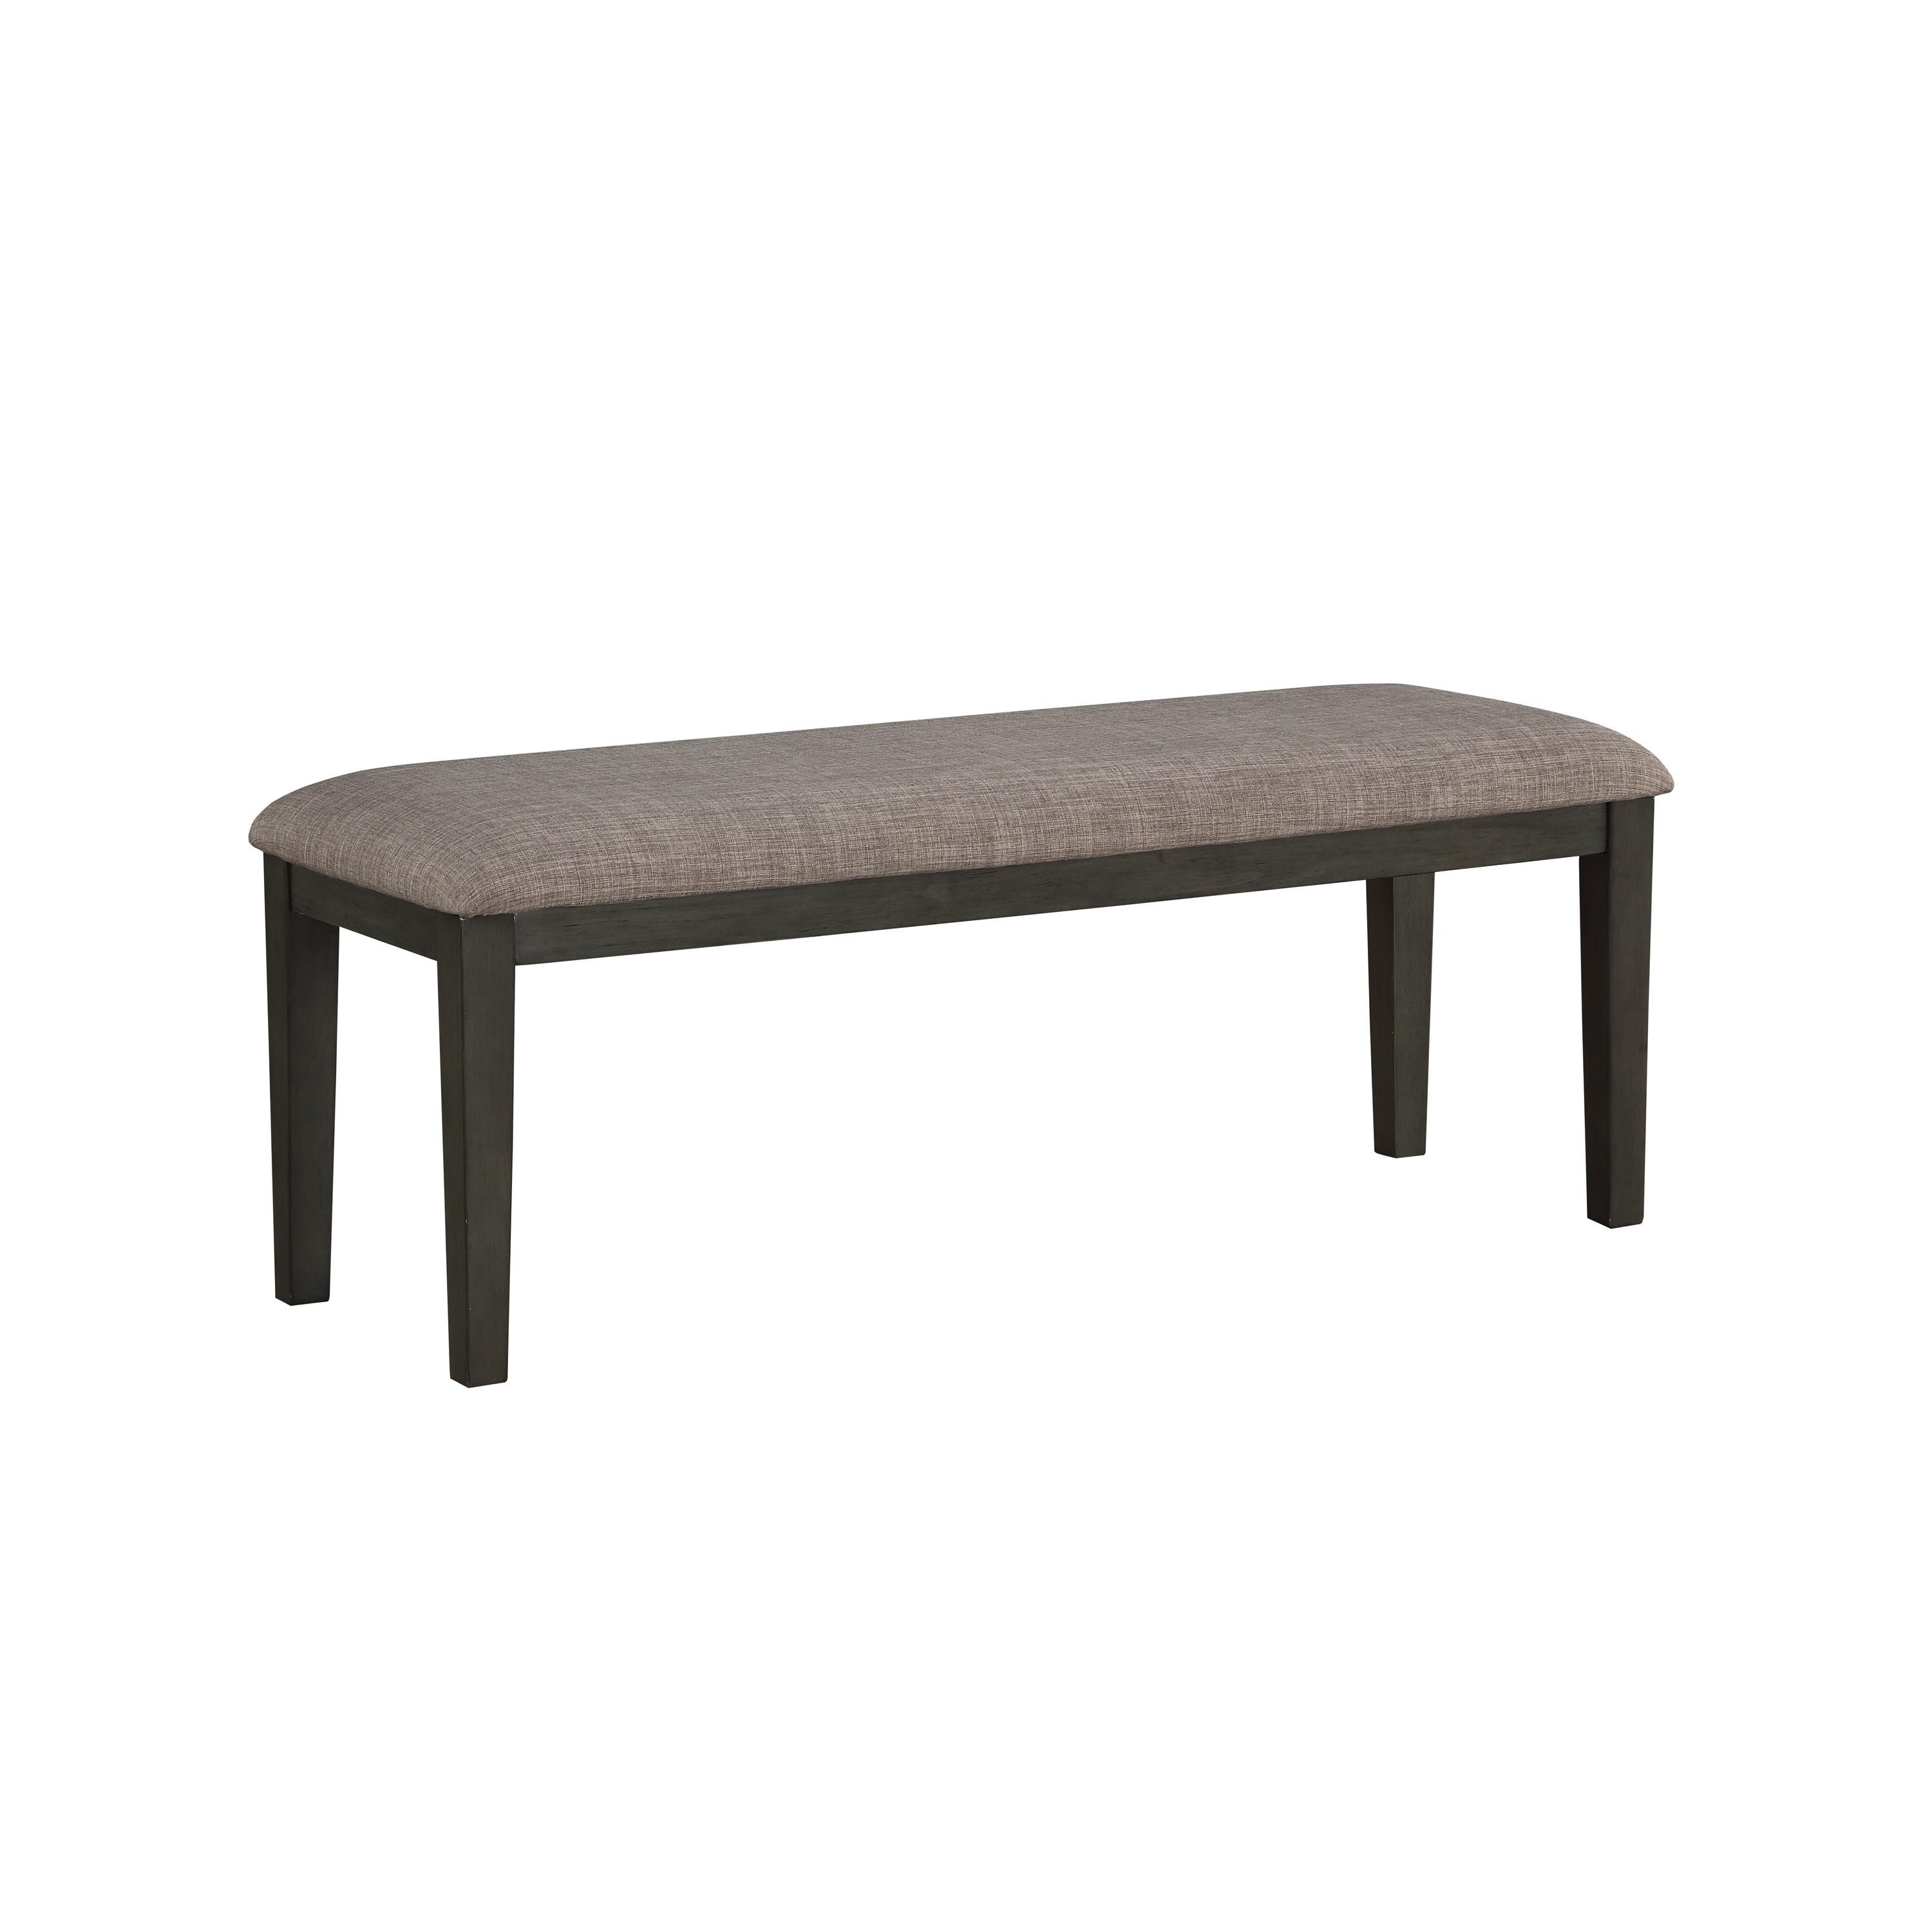 Transitional Bench 5674-13 Baresford 5674-13 in Gray Polyester